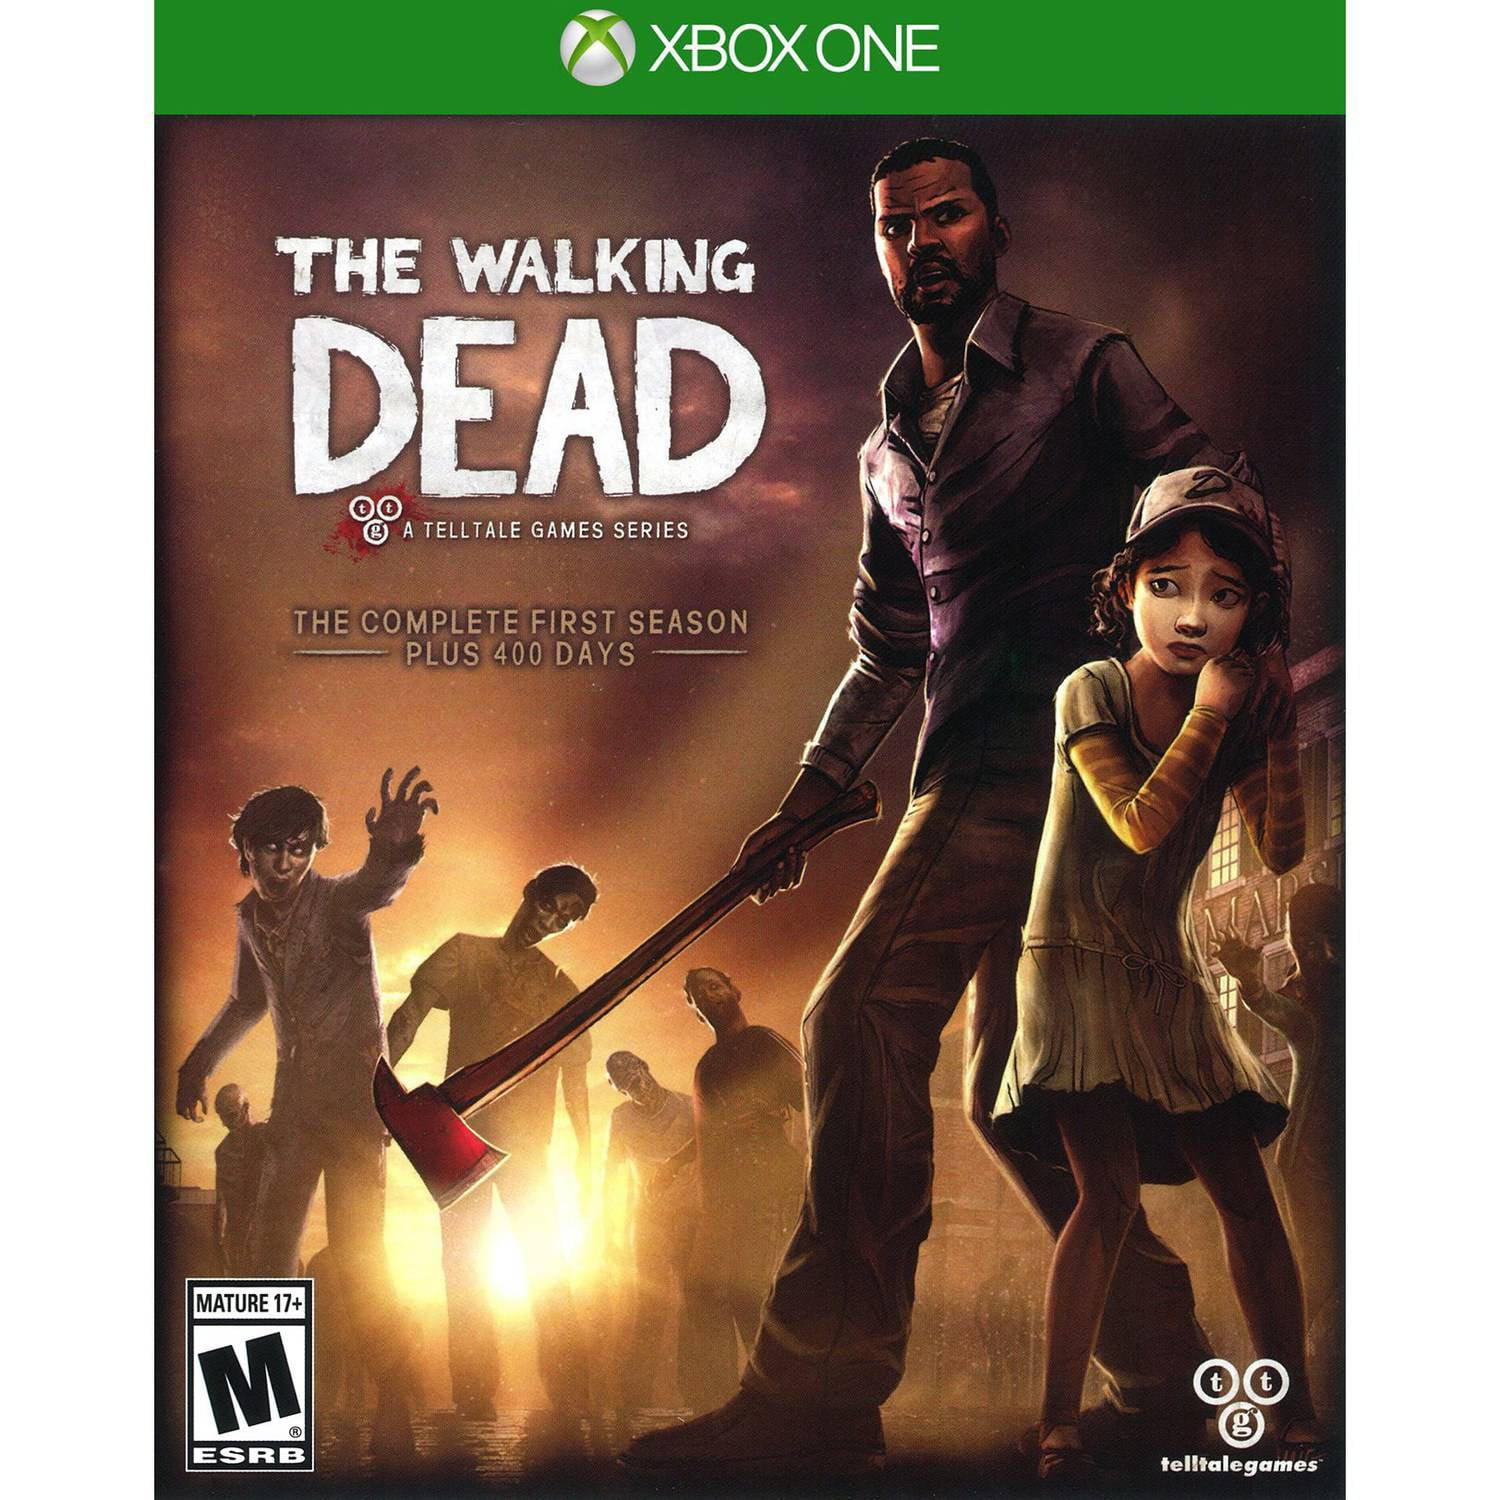 can you get the new walking dead game for a xbox 360